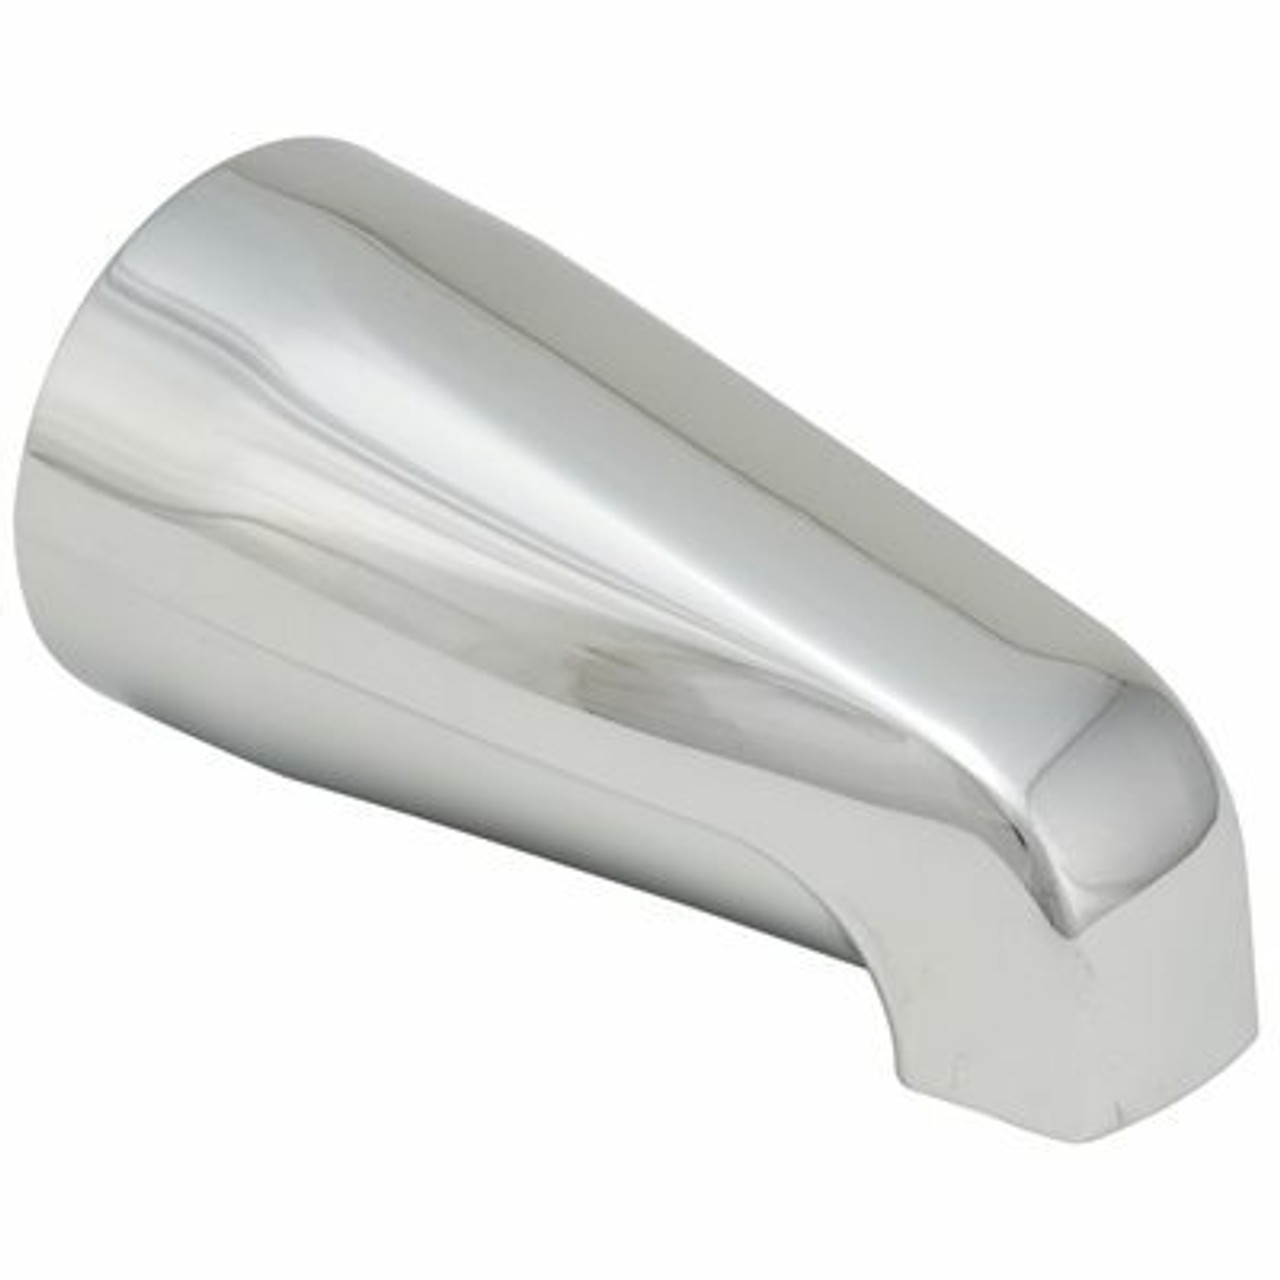 Proplus Bathtub Spout With Adjustable Slide Connector In Chrome